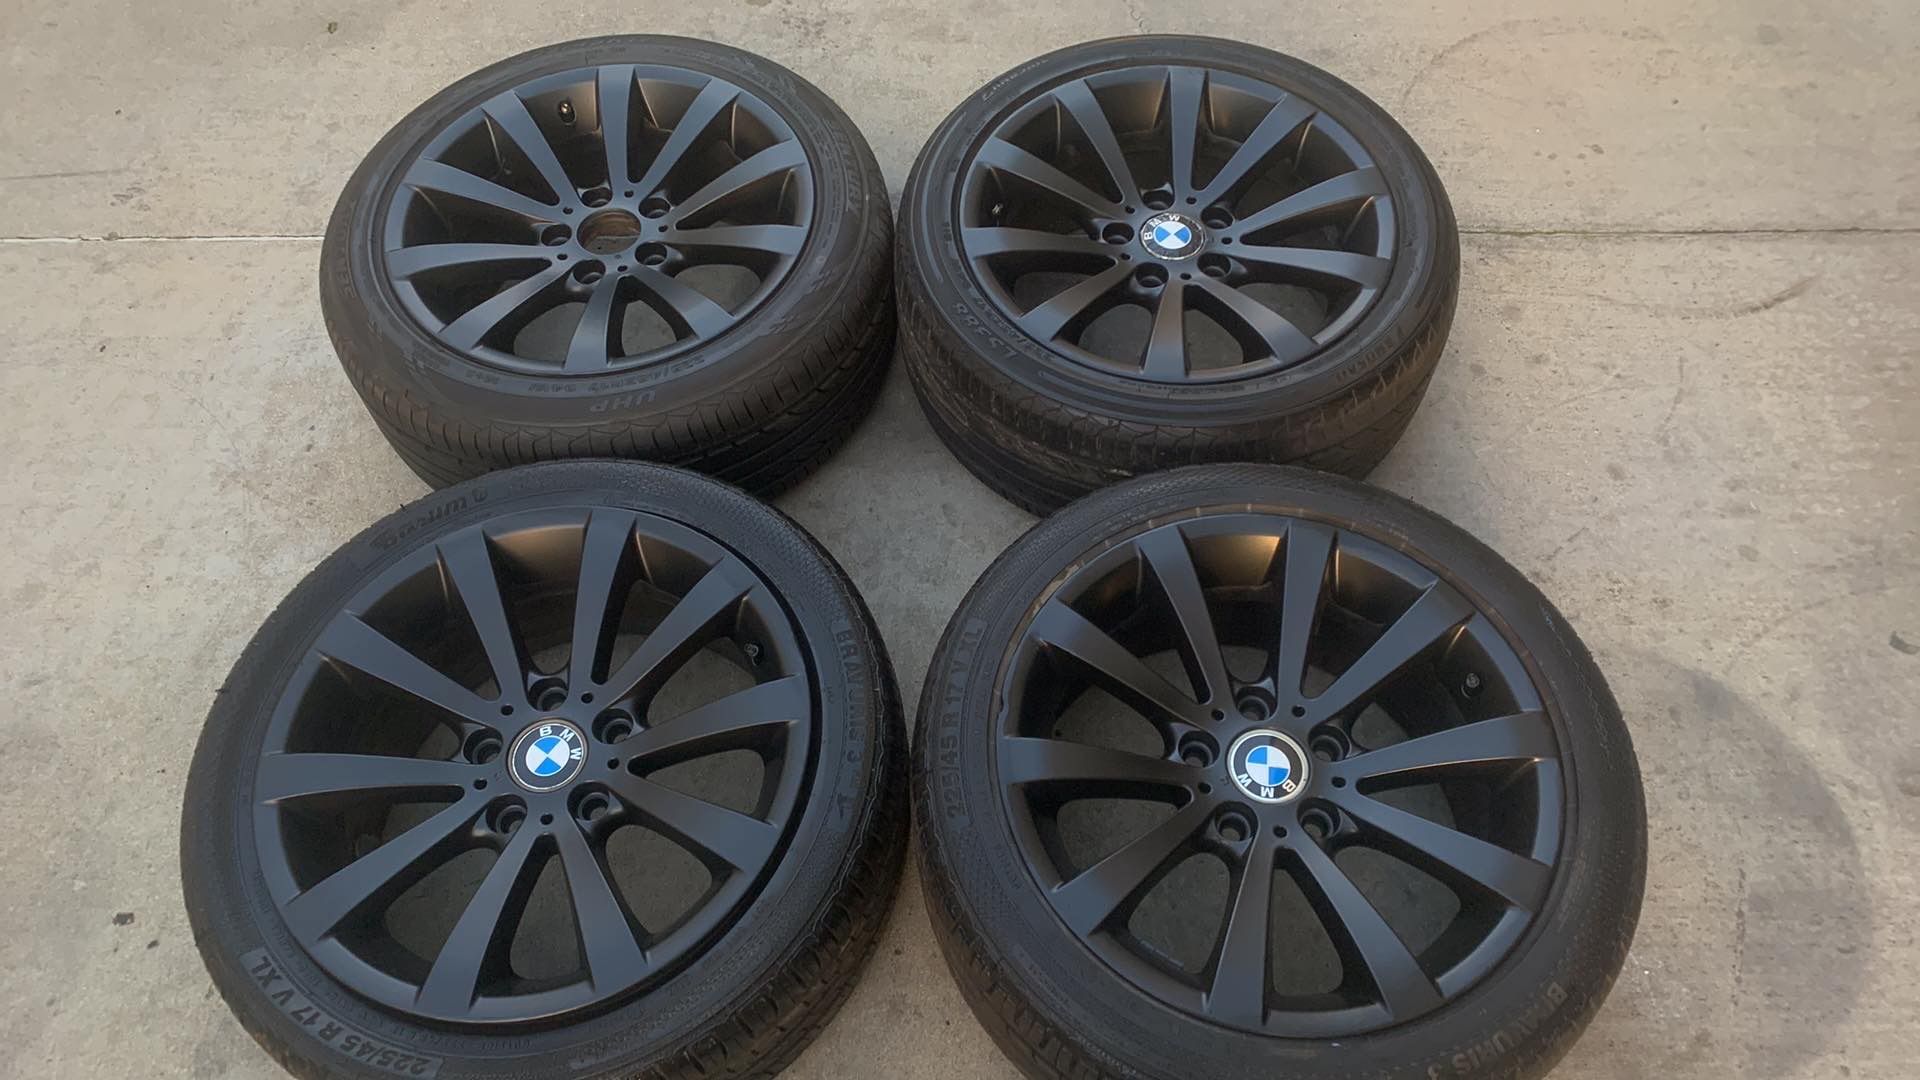 4rims and tires 17” 5x120 BMW 